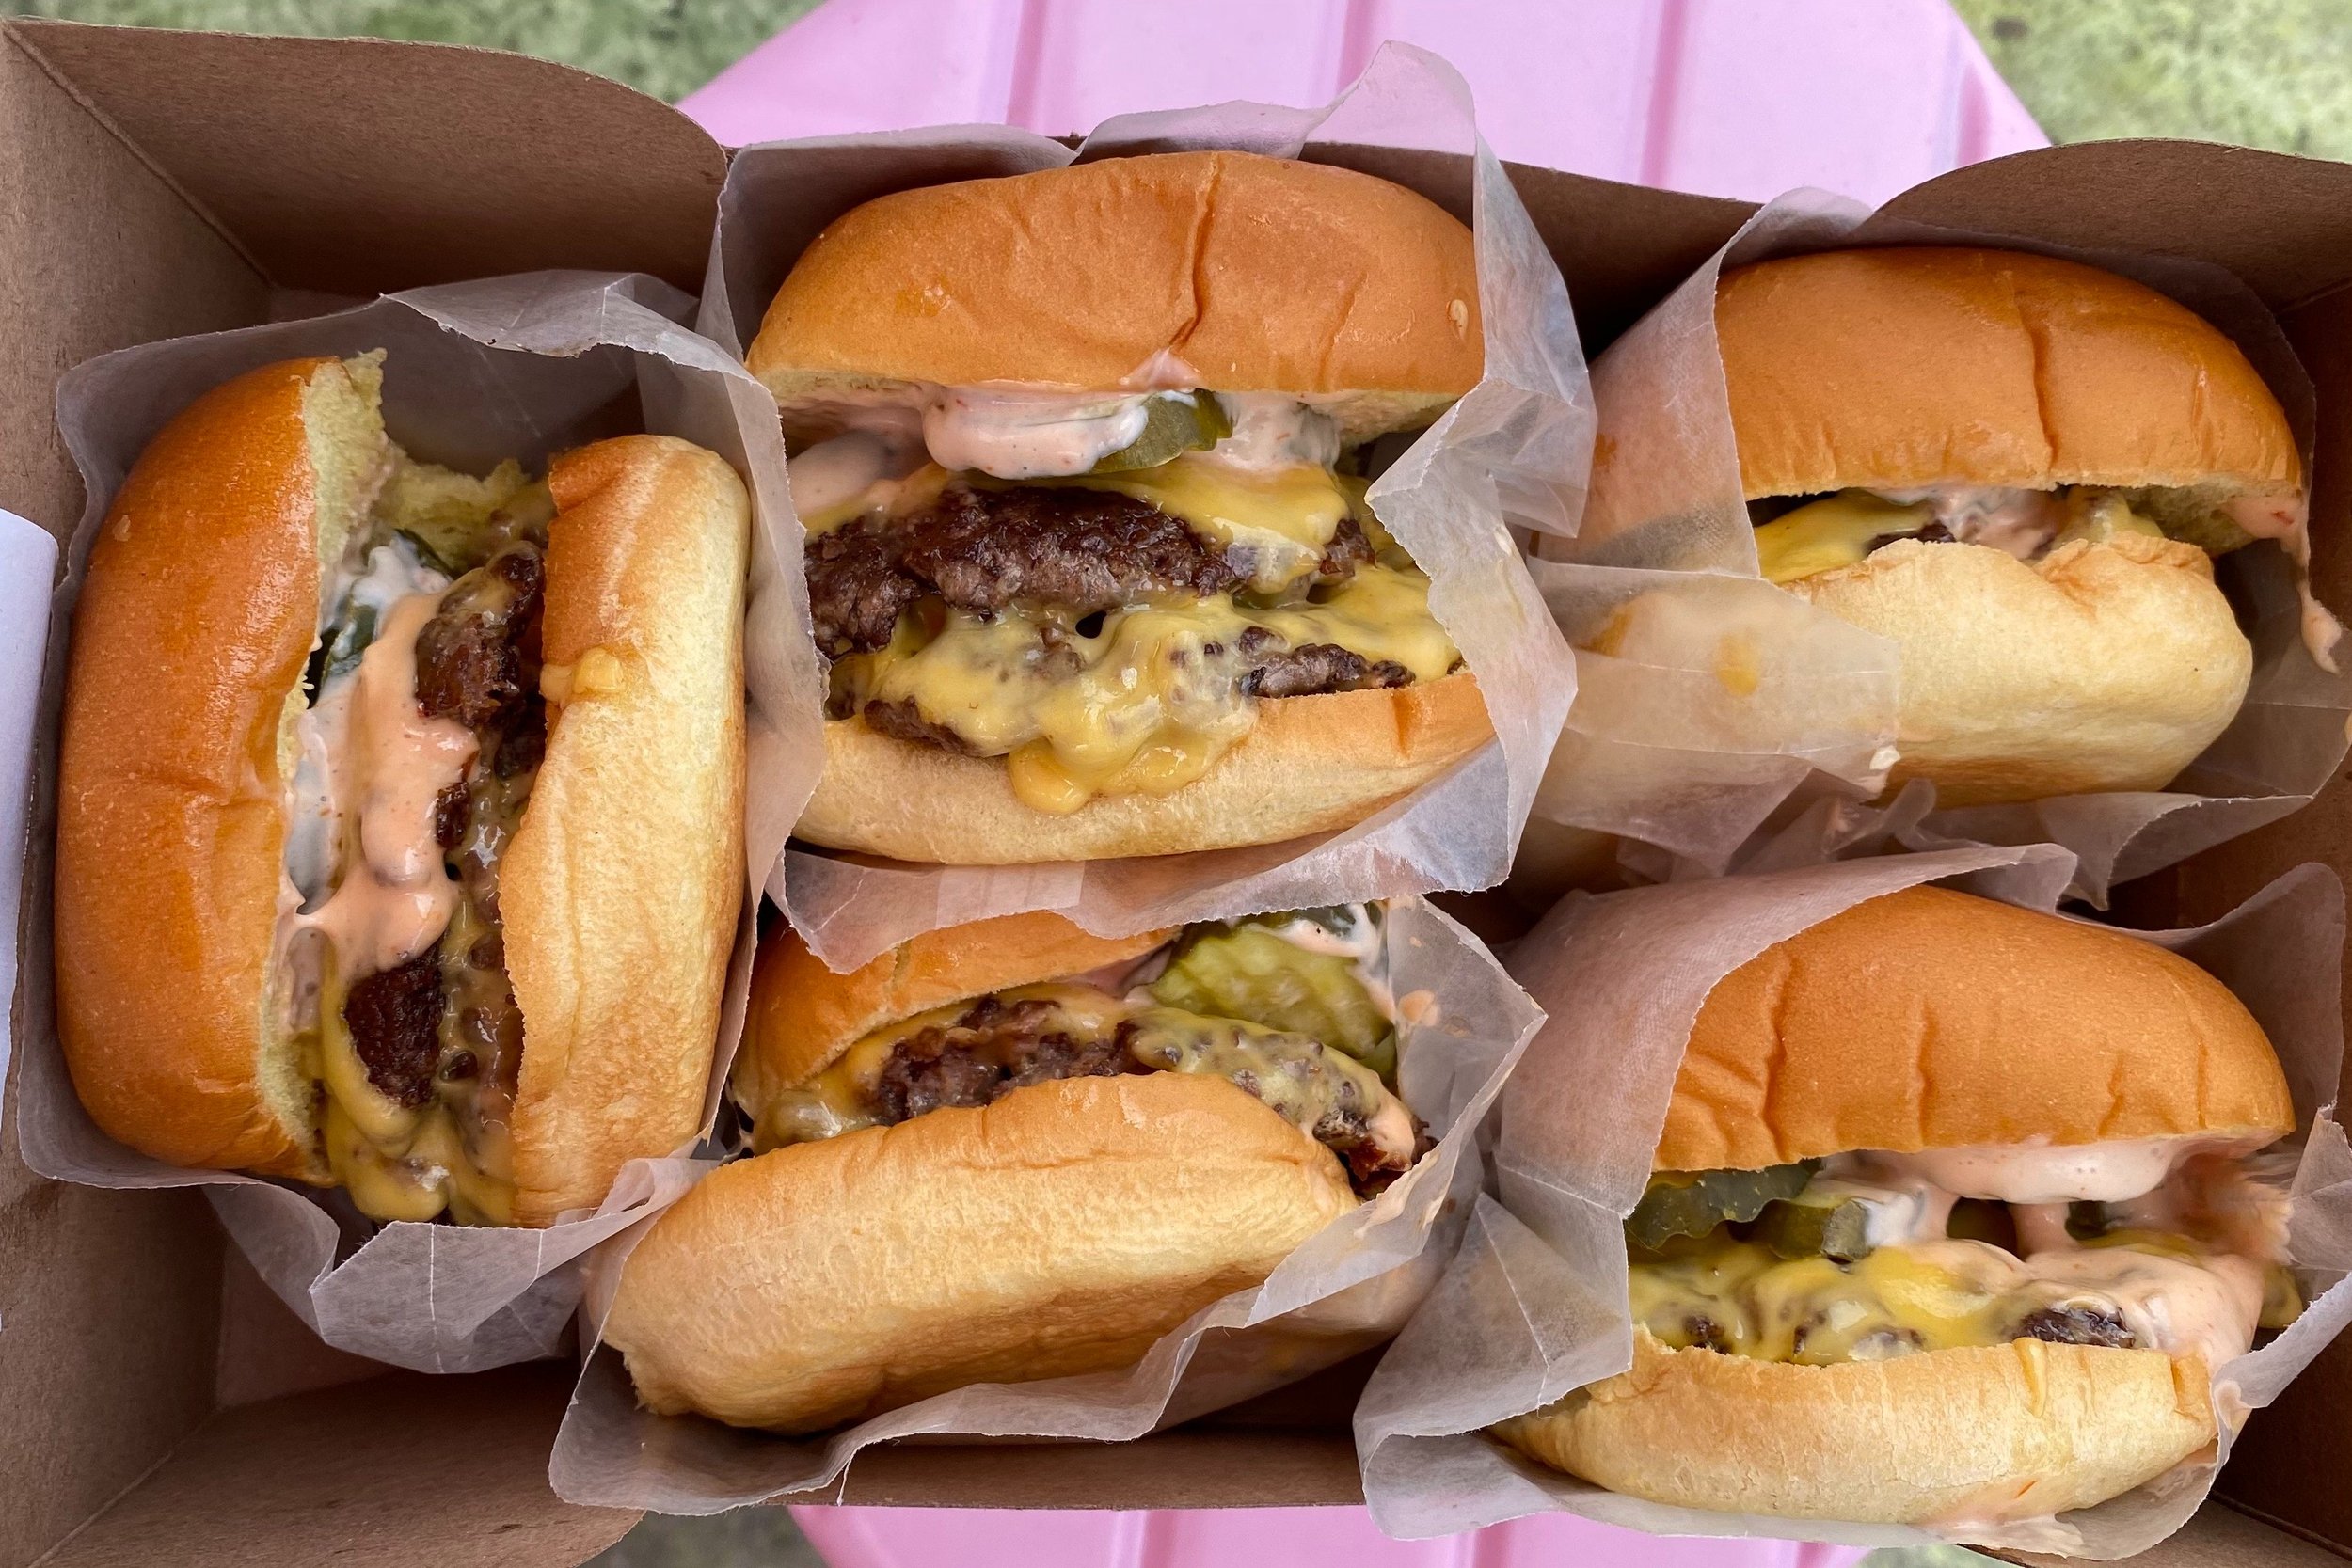  Five cheese burgers in a togo box on a pink stool 